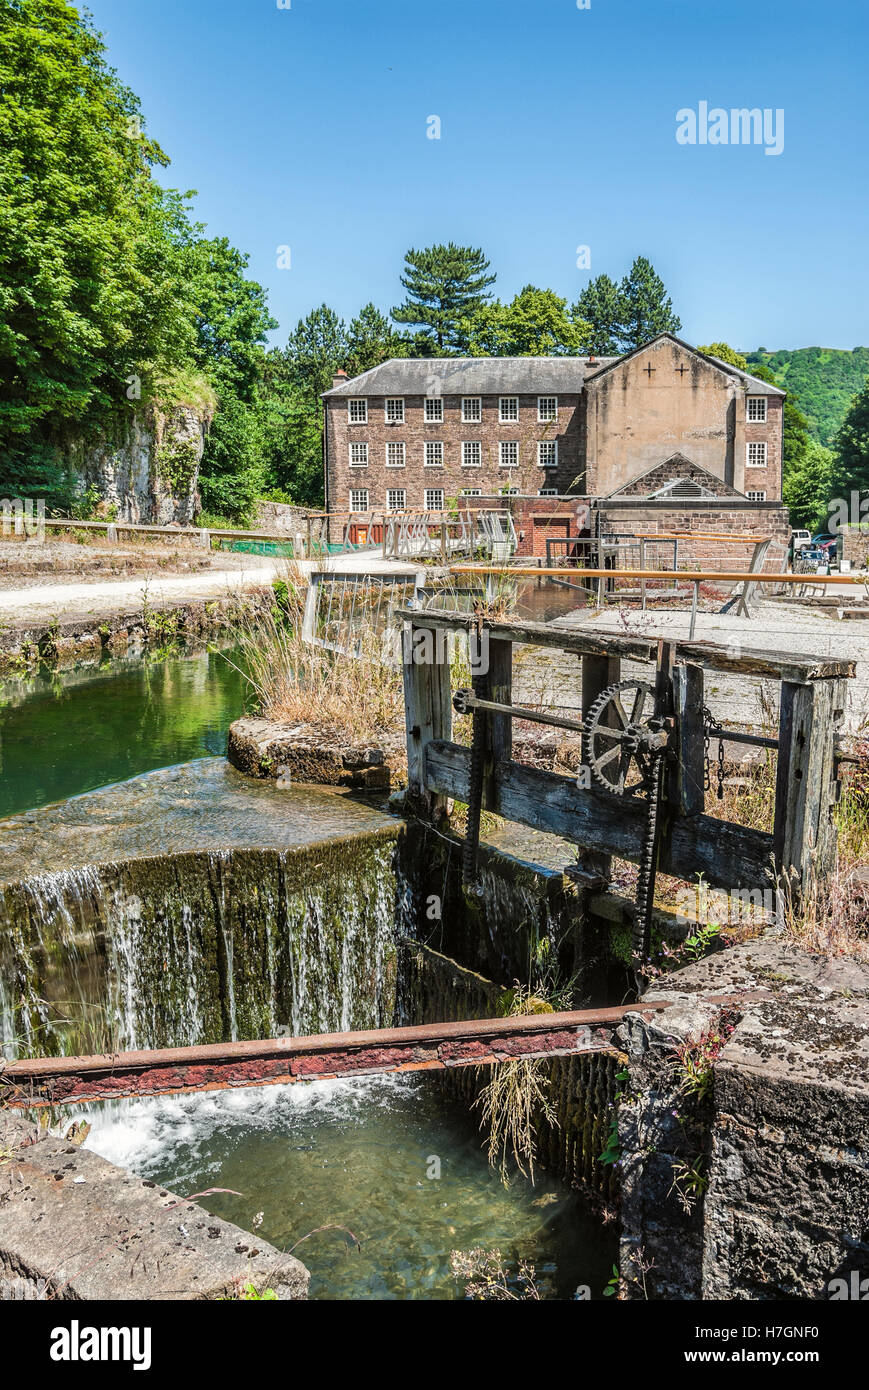 Cromford Mill water-powered cotton spinning mill in Cromford, Derbyshire, England Stock Photo